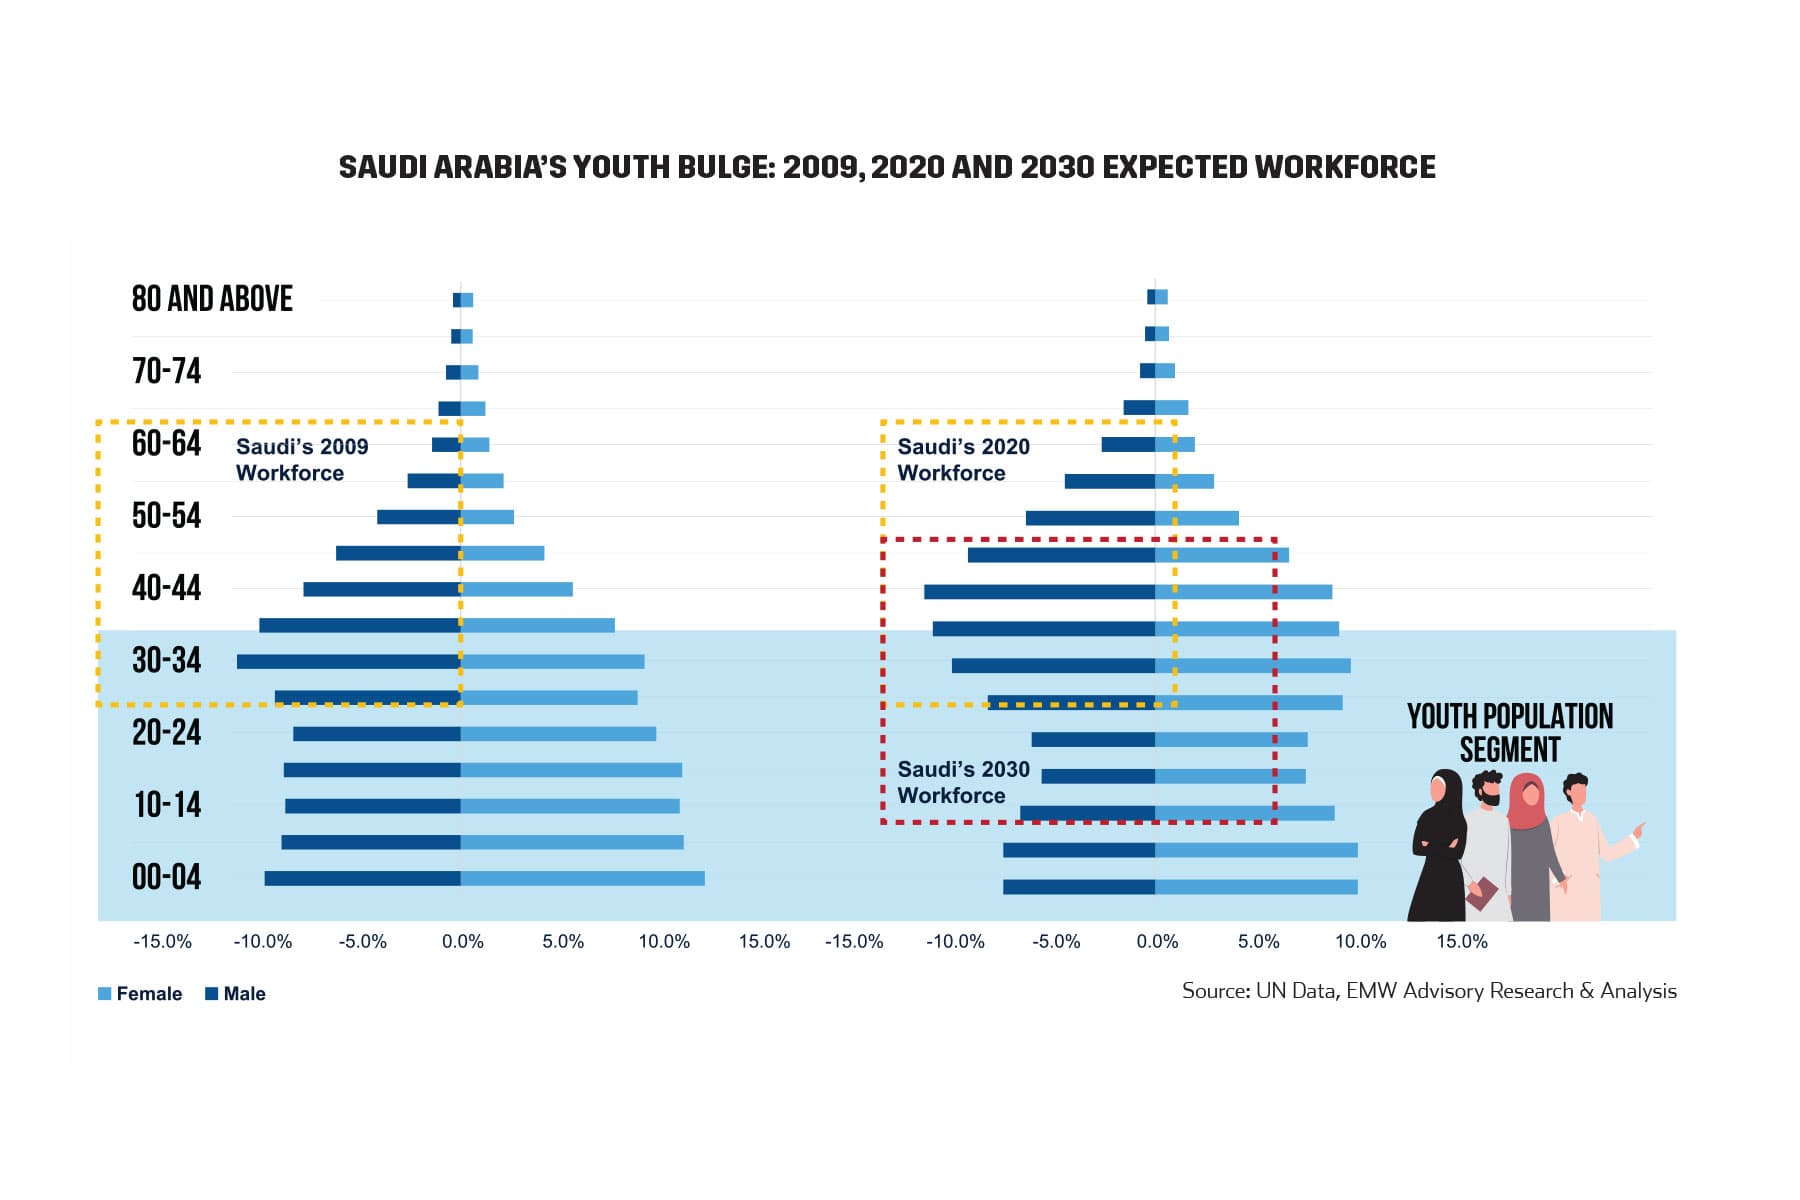 Saudi Arabia’s Youth Bulge: 2009, 2020 and 2030 Expected Workforce